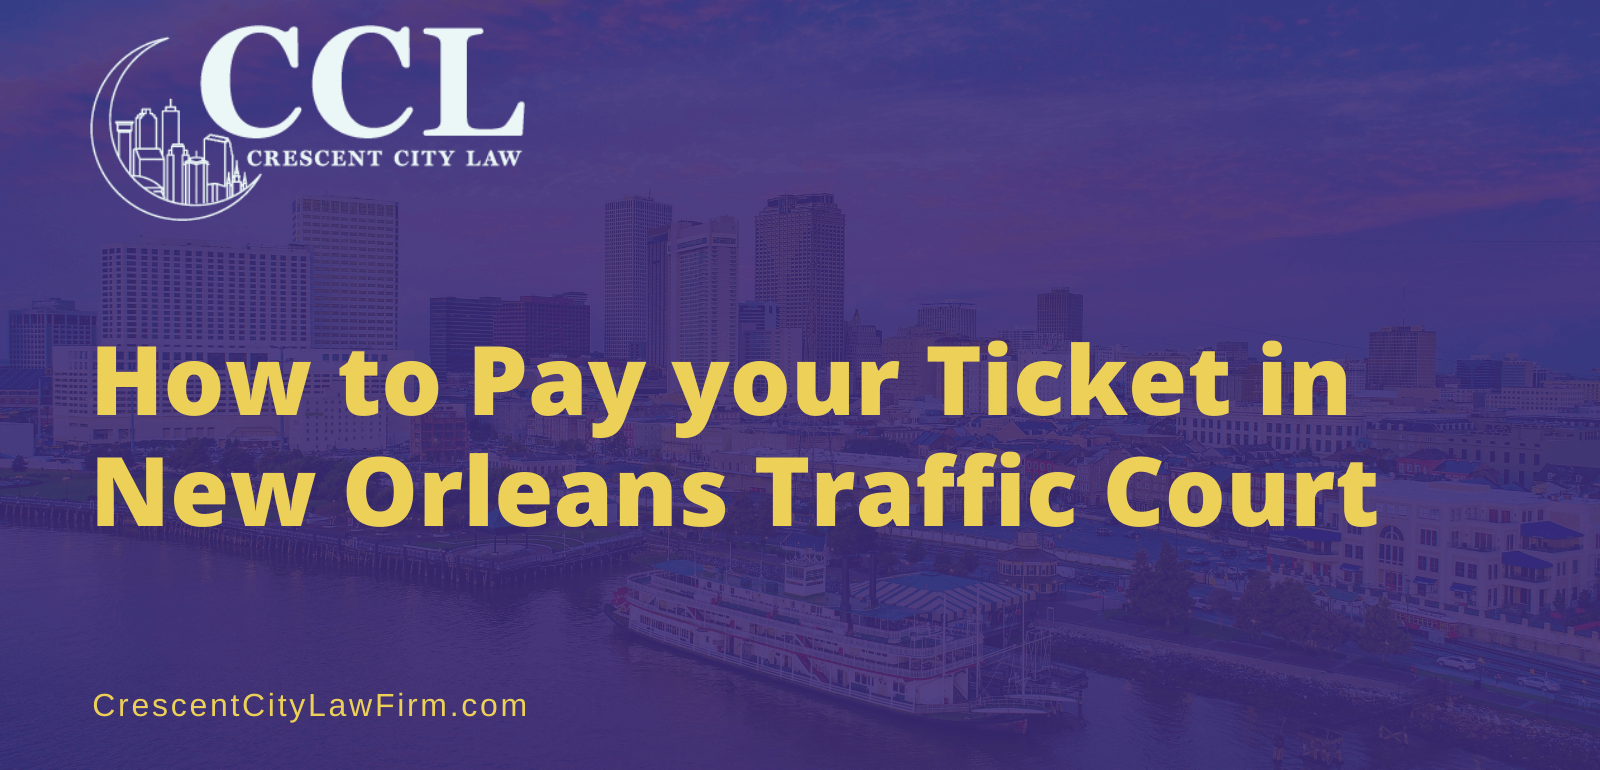 How to Pay your Ticket in New Orleans Traffic Court - crescent city law firm - traffic ticket lawyer